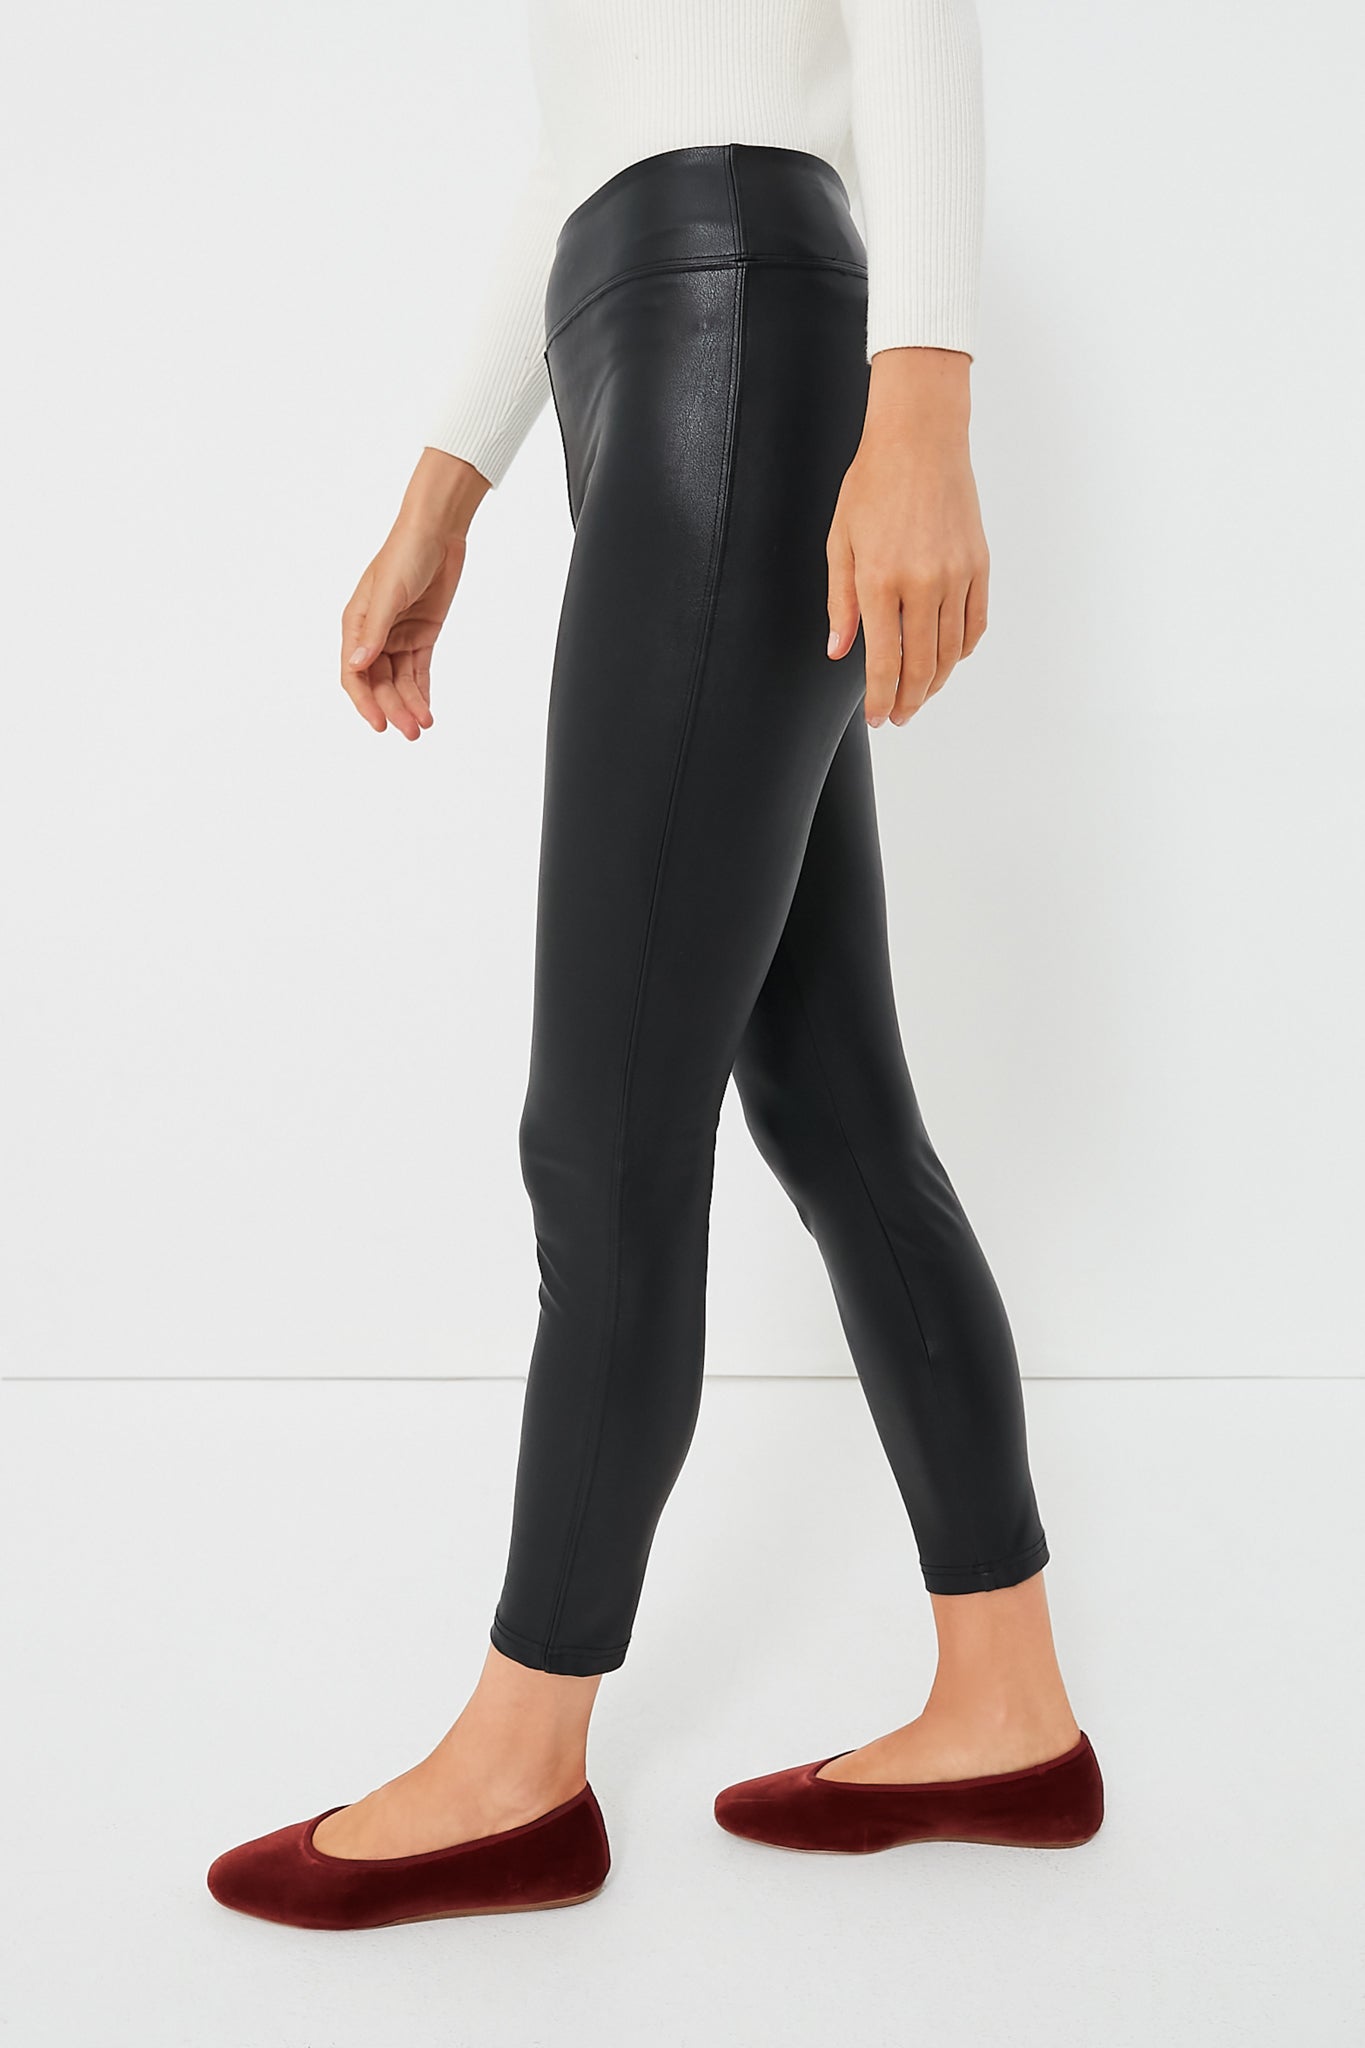 over 20 spanx leather leggings outfits - By Lauren M